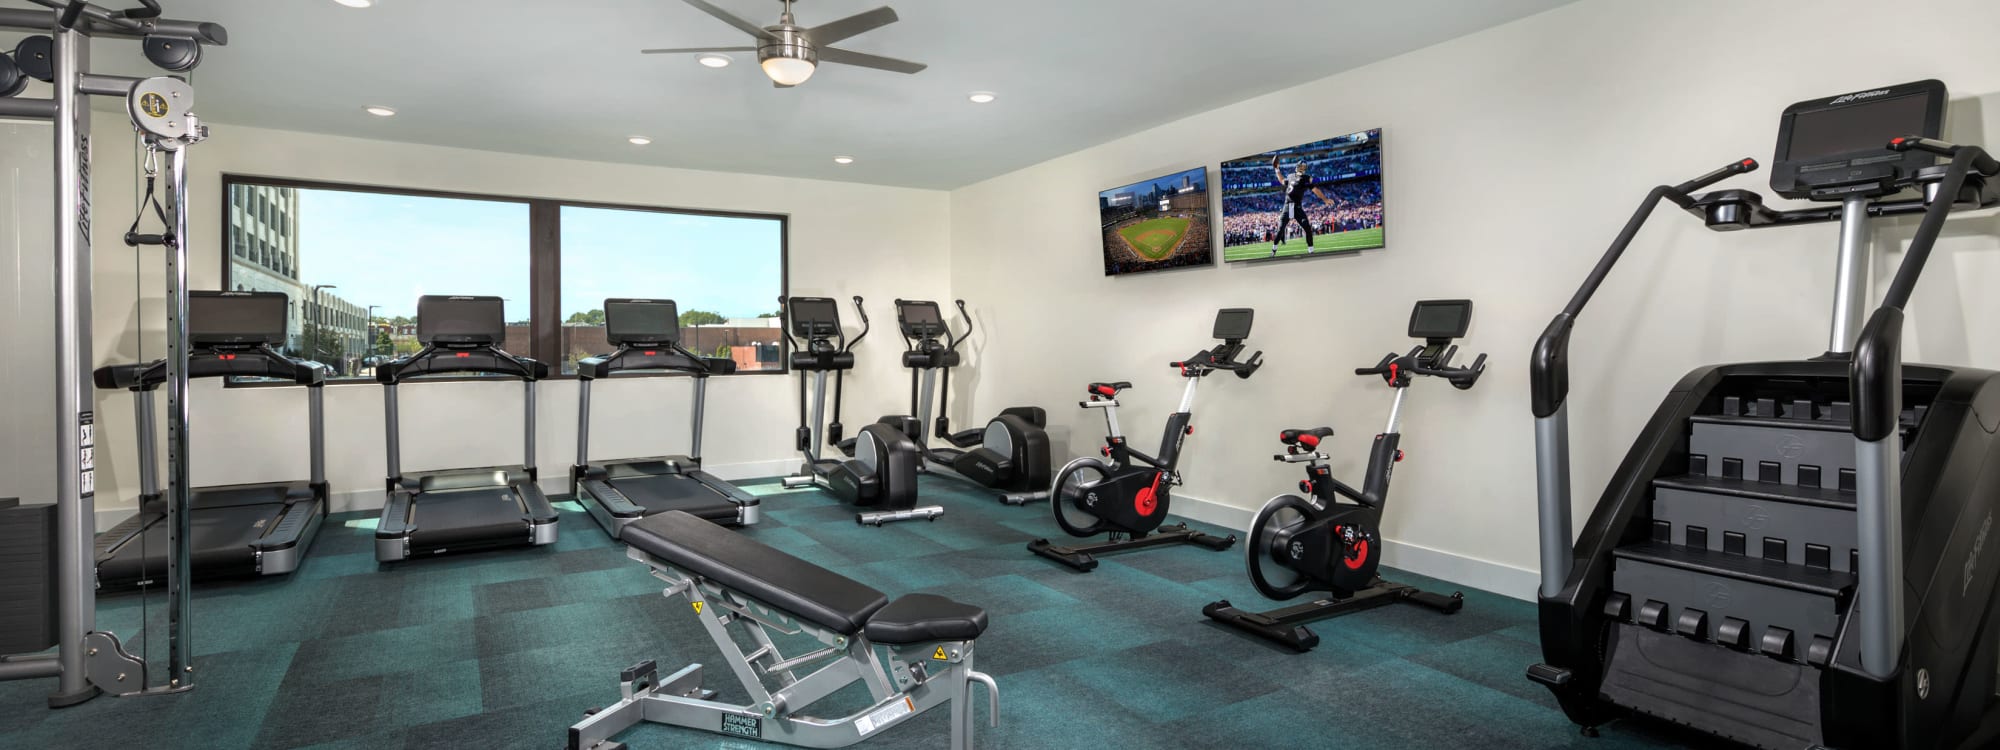 Fitness center at The Scout Scott's Addition in Richmond, Virginia